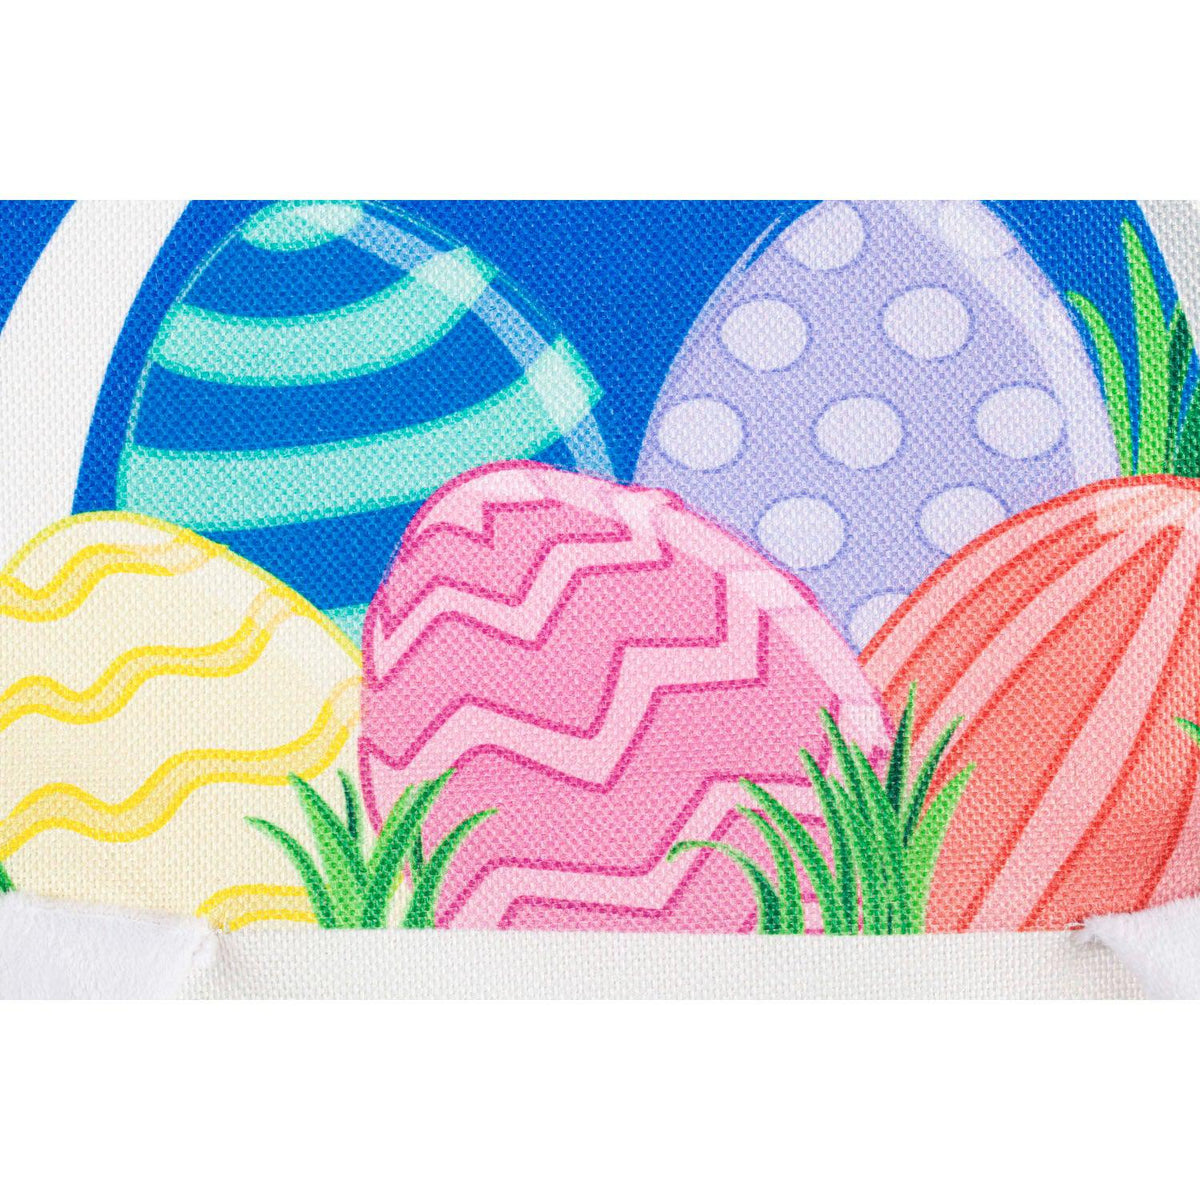 The Easter Bunny Basket garden flag features multi-colored Easter eggs in a white bunny basket and the words "Happy Easter ".  This flag is constructed of high quality durable burlap fabric with 3D appliqué details. 